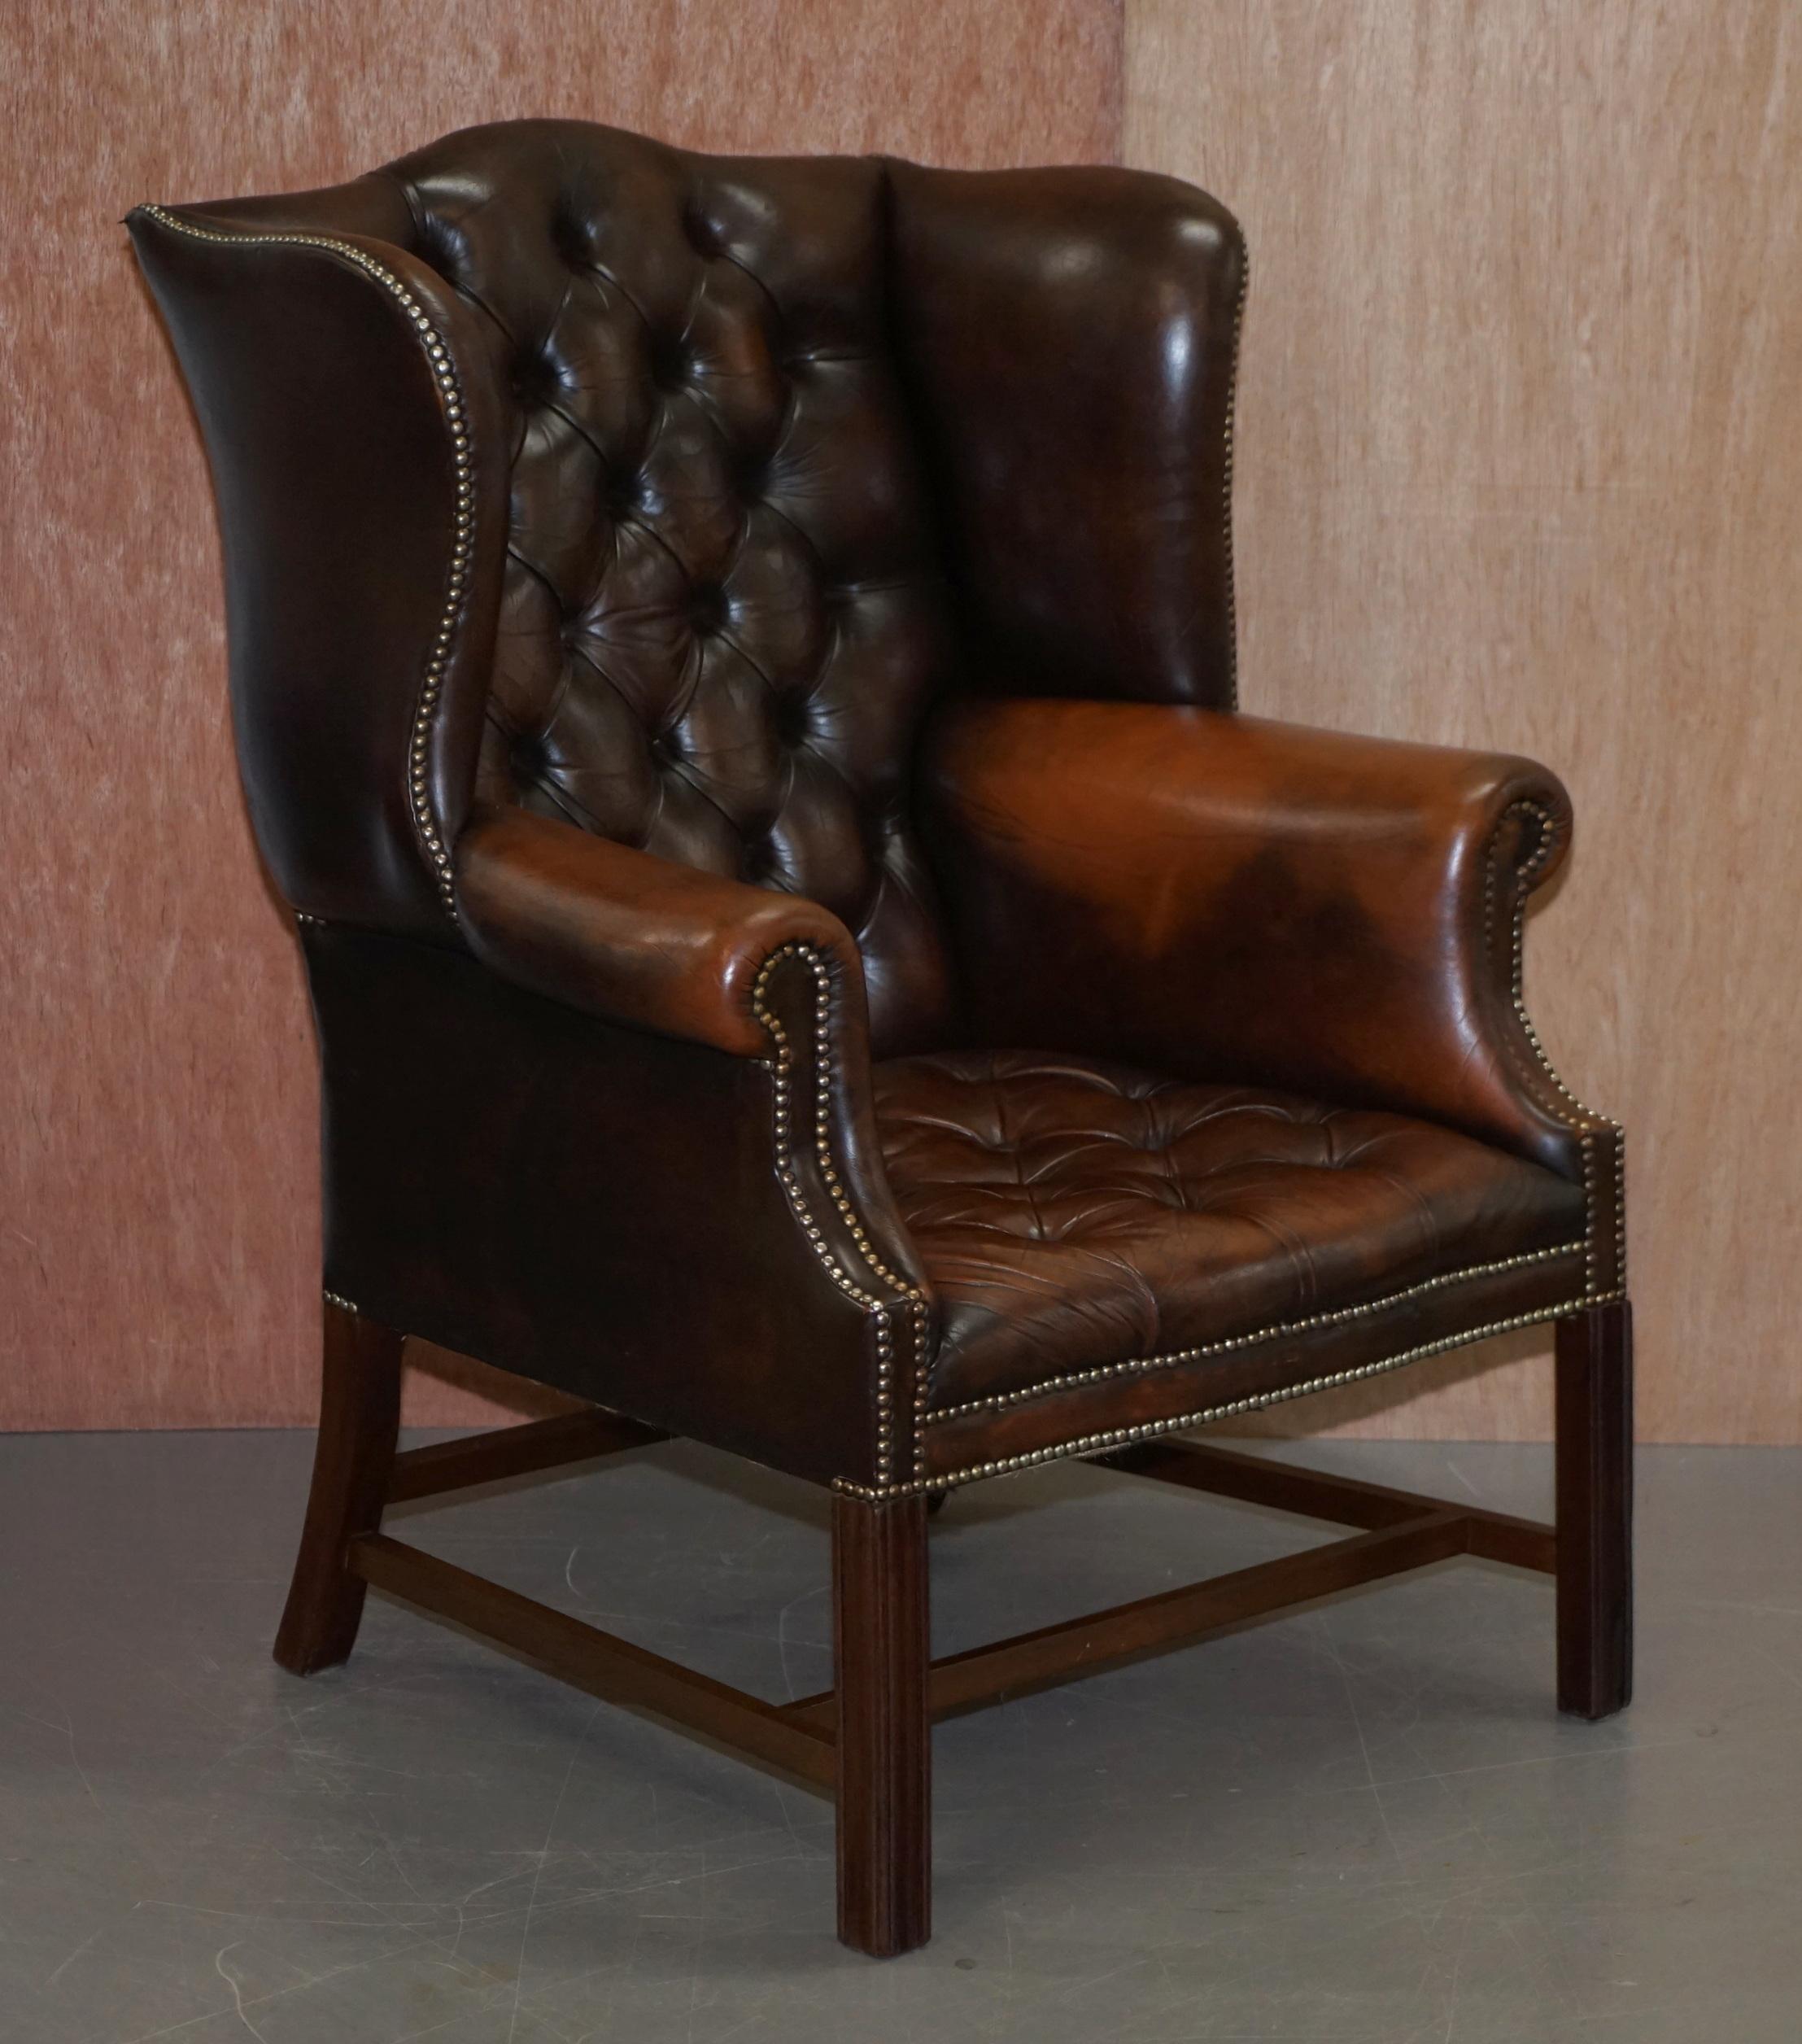 We are delighted to offer for sale this lovely vintage lightly restored Georgian H-framed Chesterfield wingback armchair and footstool in brown leather 

A lovely pair, full of vintage charm and character, we have lightly restored them to include